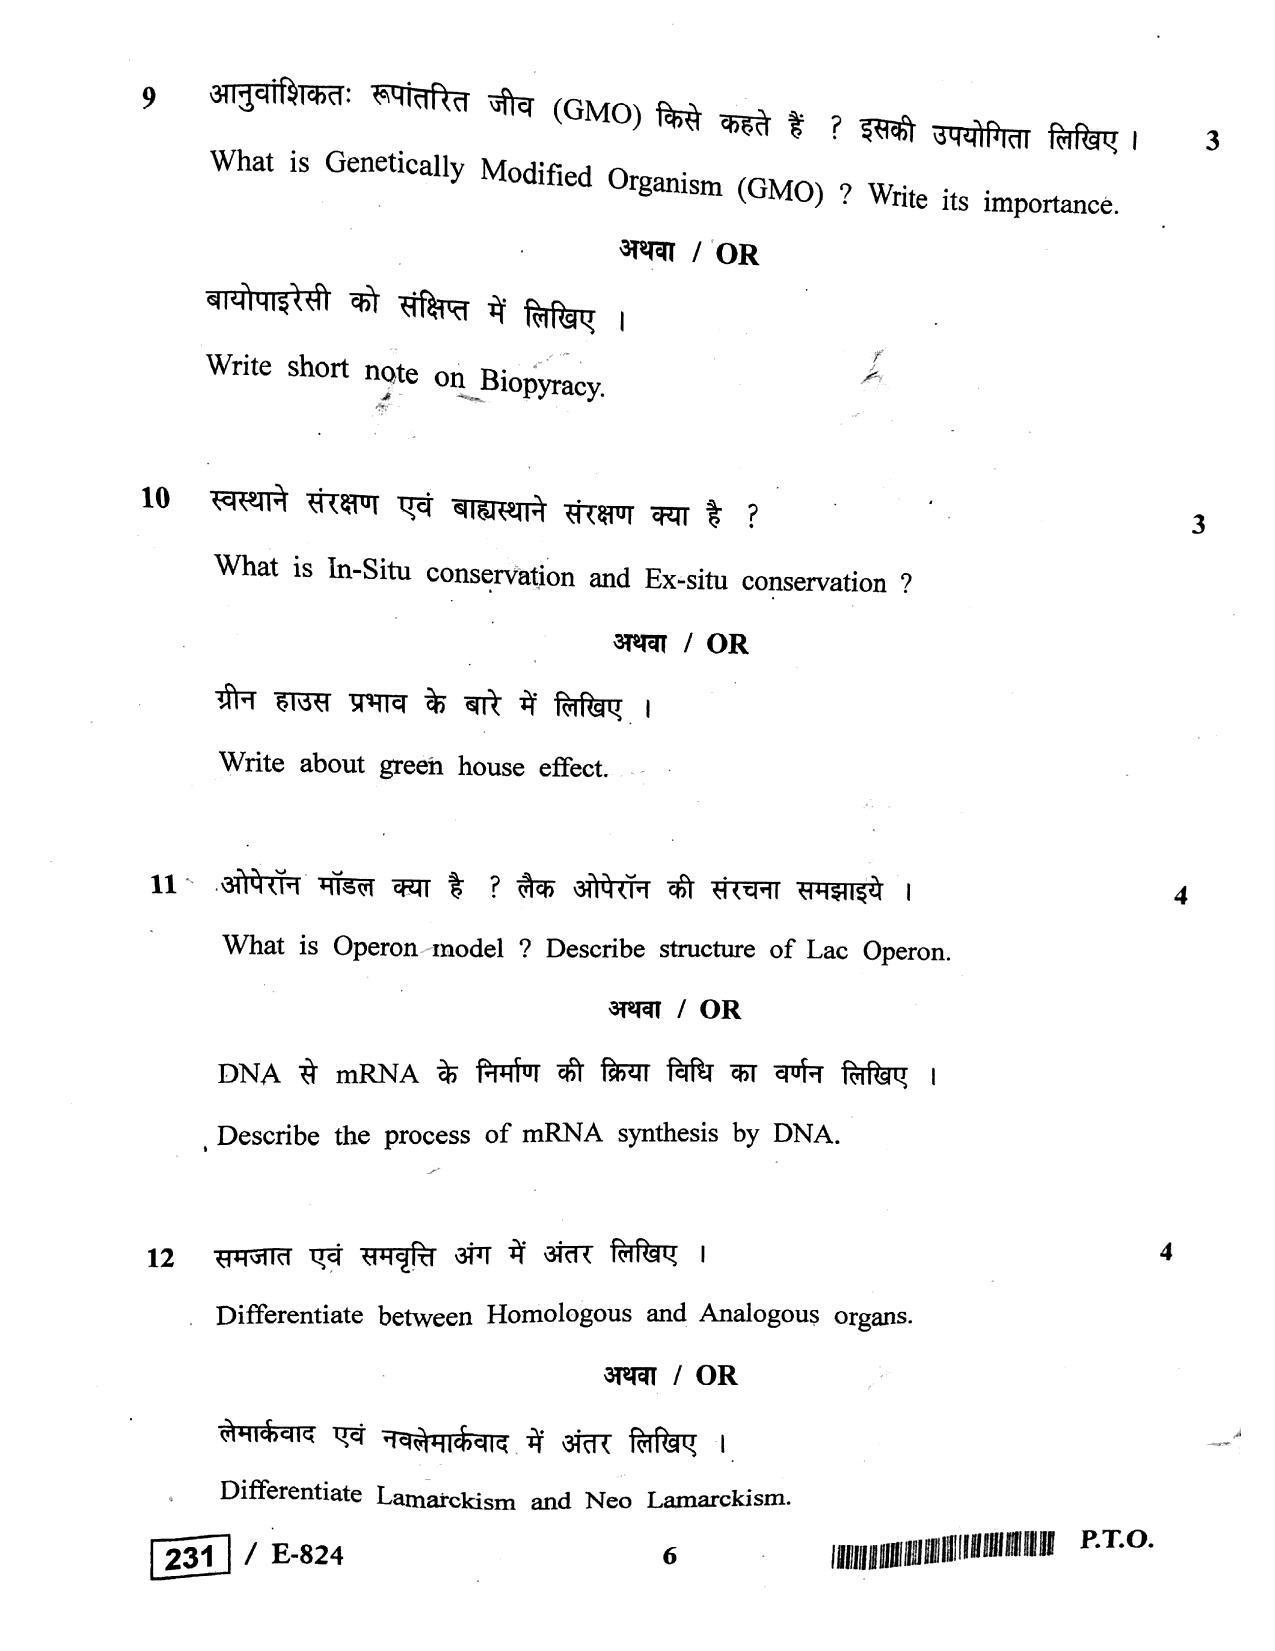 MP Board Class 12 Biology 2020 Question Paper - Page 6